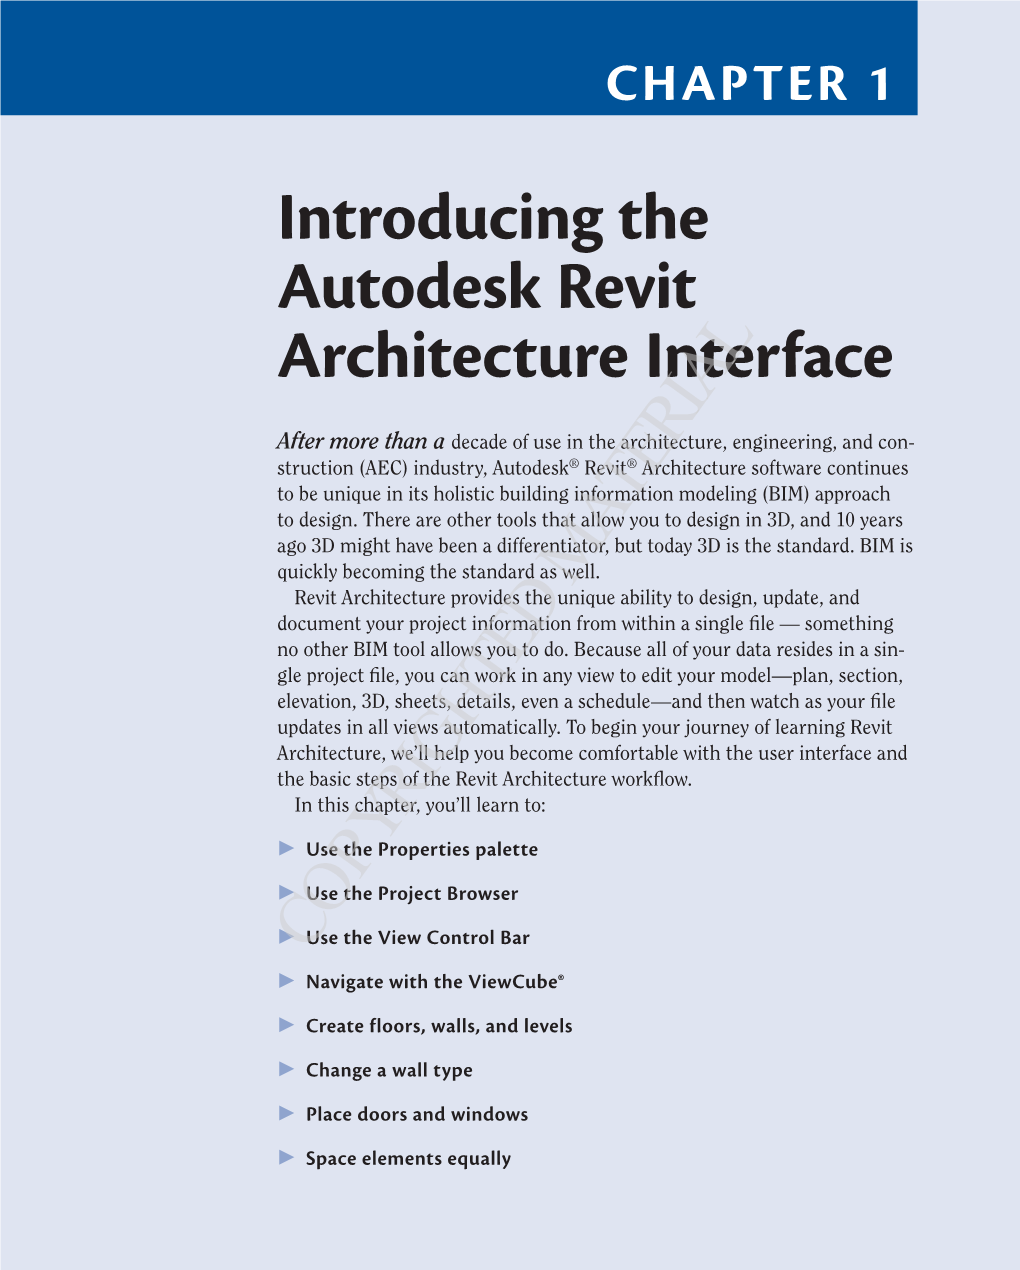 Introducing the Autodesk Revit Architecture Interface